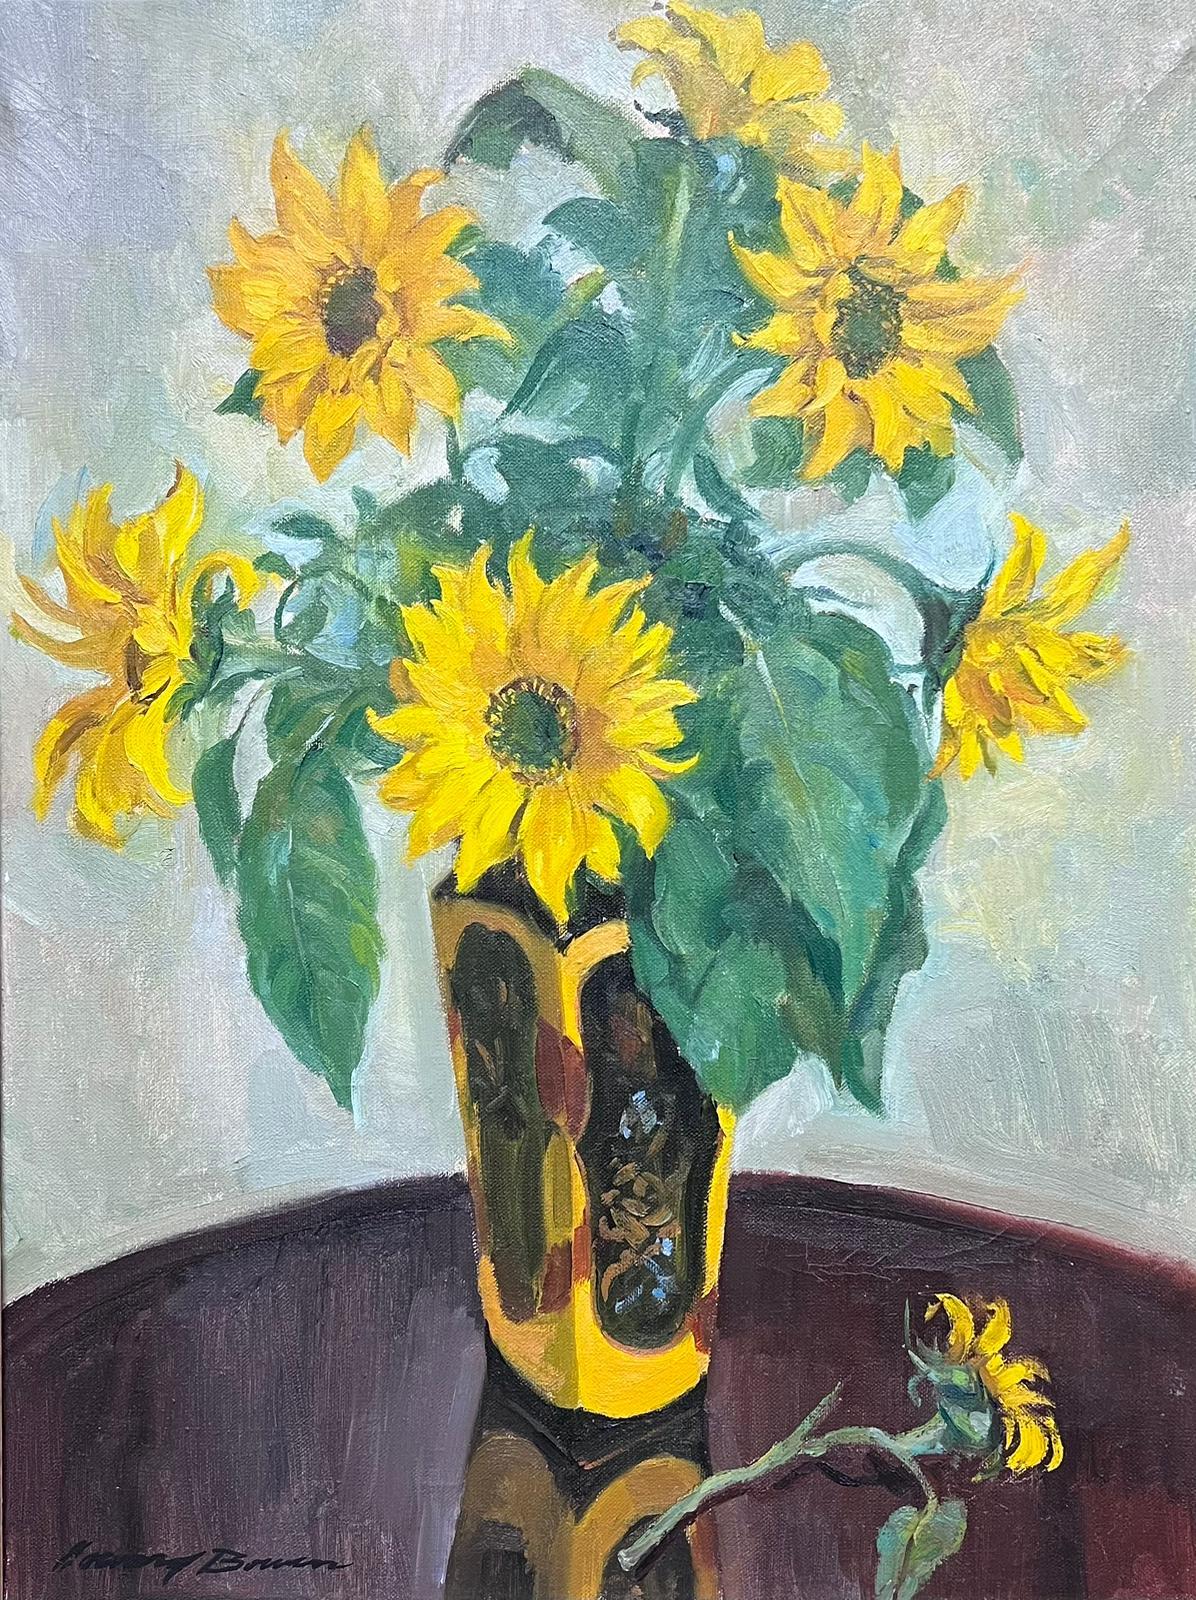 Sunflowers in Vase
English Impressionist artist, mid 20th century
indistinctly signed oil on canvas, framed
framed: 29 x 23.5 inches 
canvas: 24 x 18 inches
provenance: private collection
condition: a few minor indents and 'dings' to the canvas, but